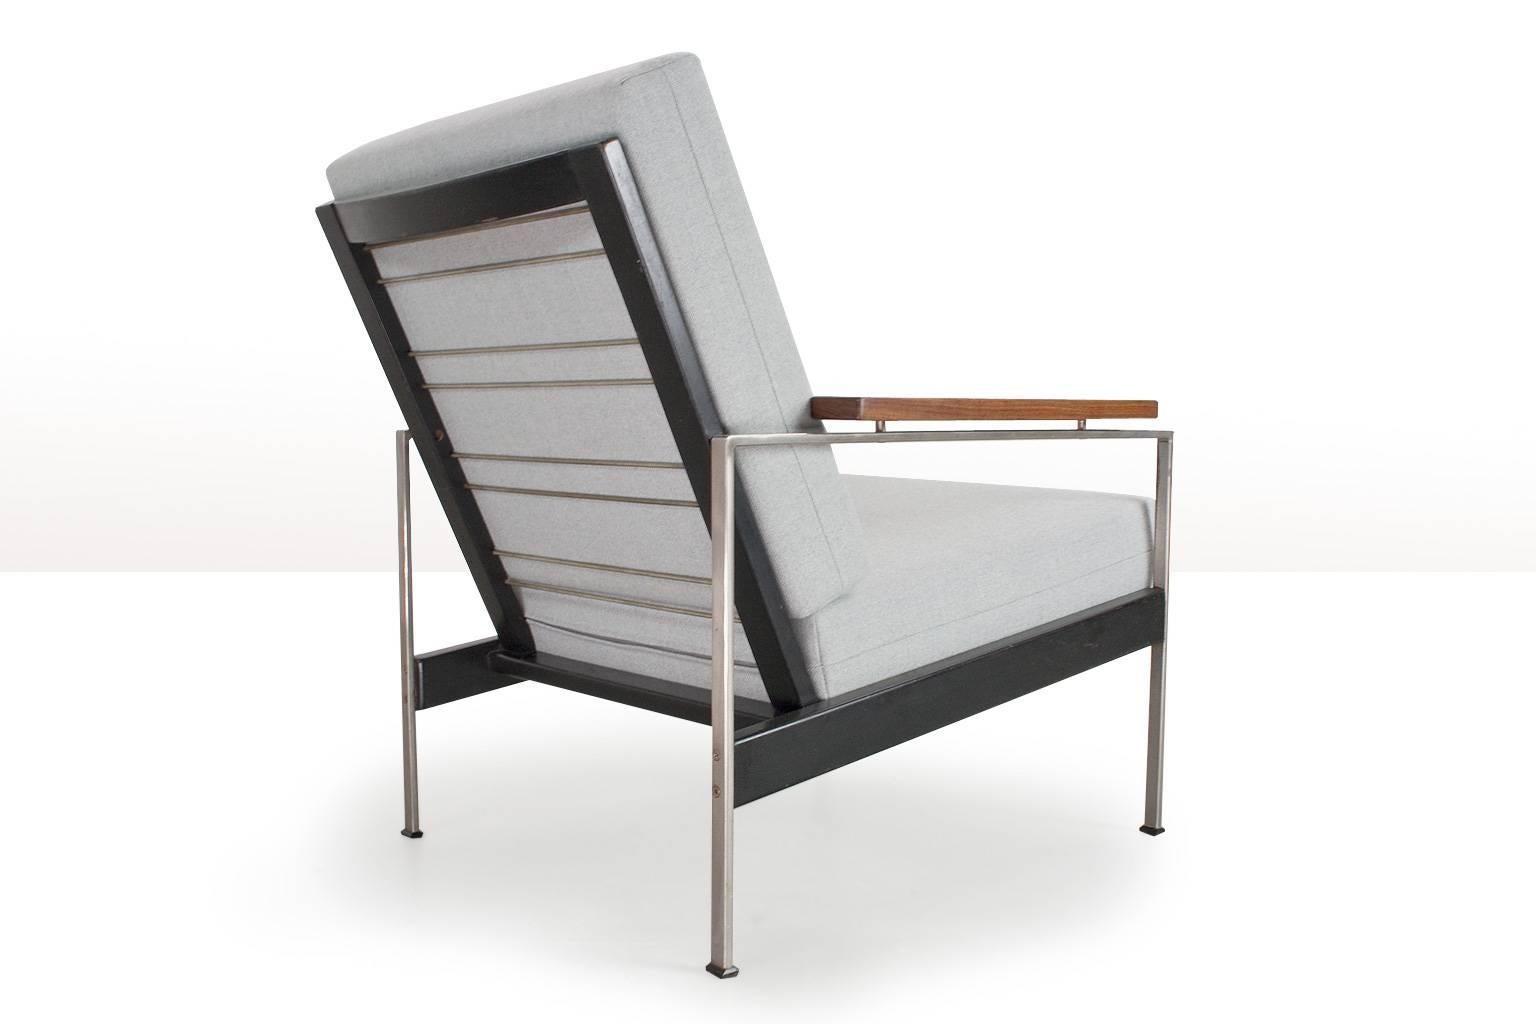 Rob Parry lounge chair Lotus in black lacquered wood and metal, with new light grey Ploegwool upholstery. Completely checked and new upholstered. The listed item is in very good condition, light patina through use on the frame as shown on photos.